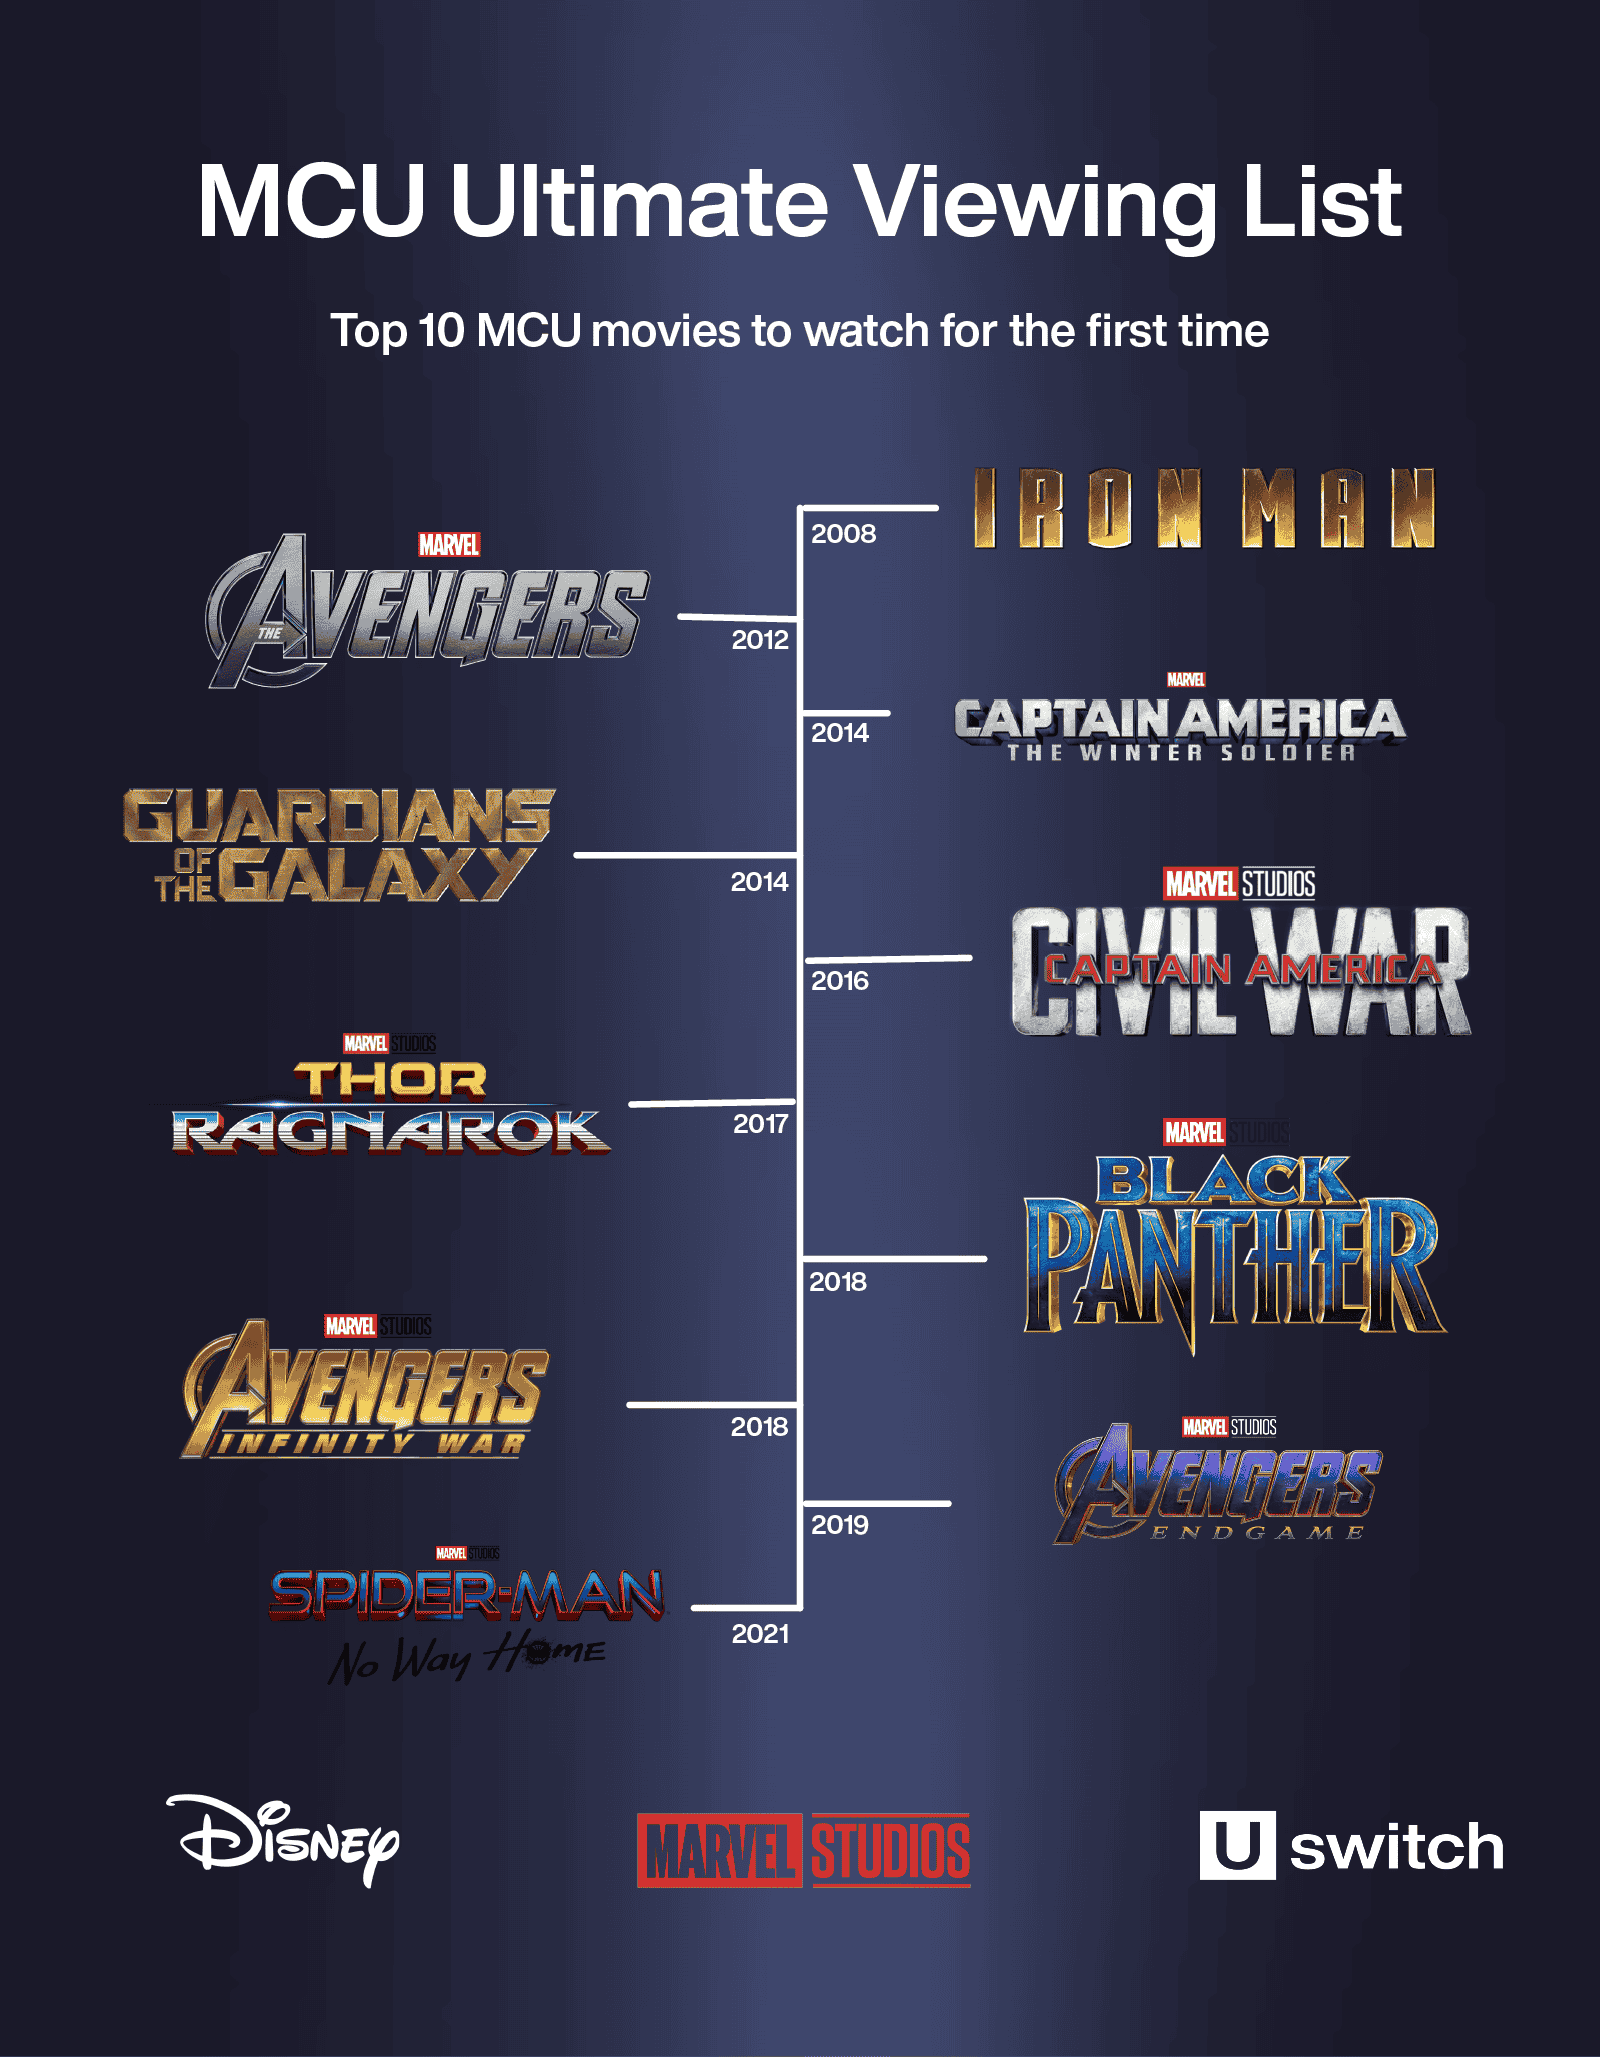 MCU timeline: Watch the Marvel movies in order | Uswitch